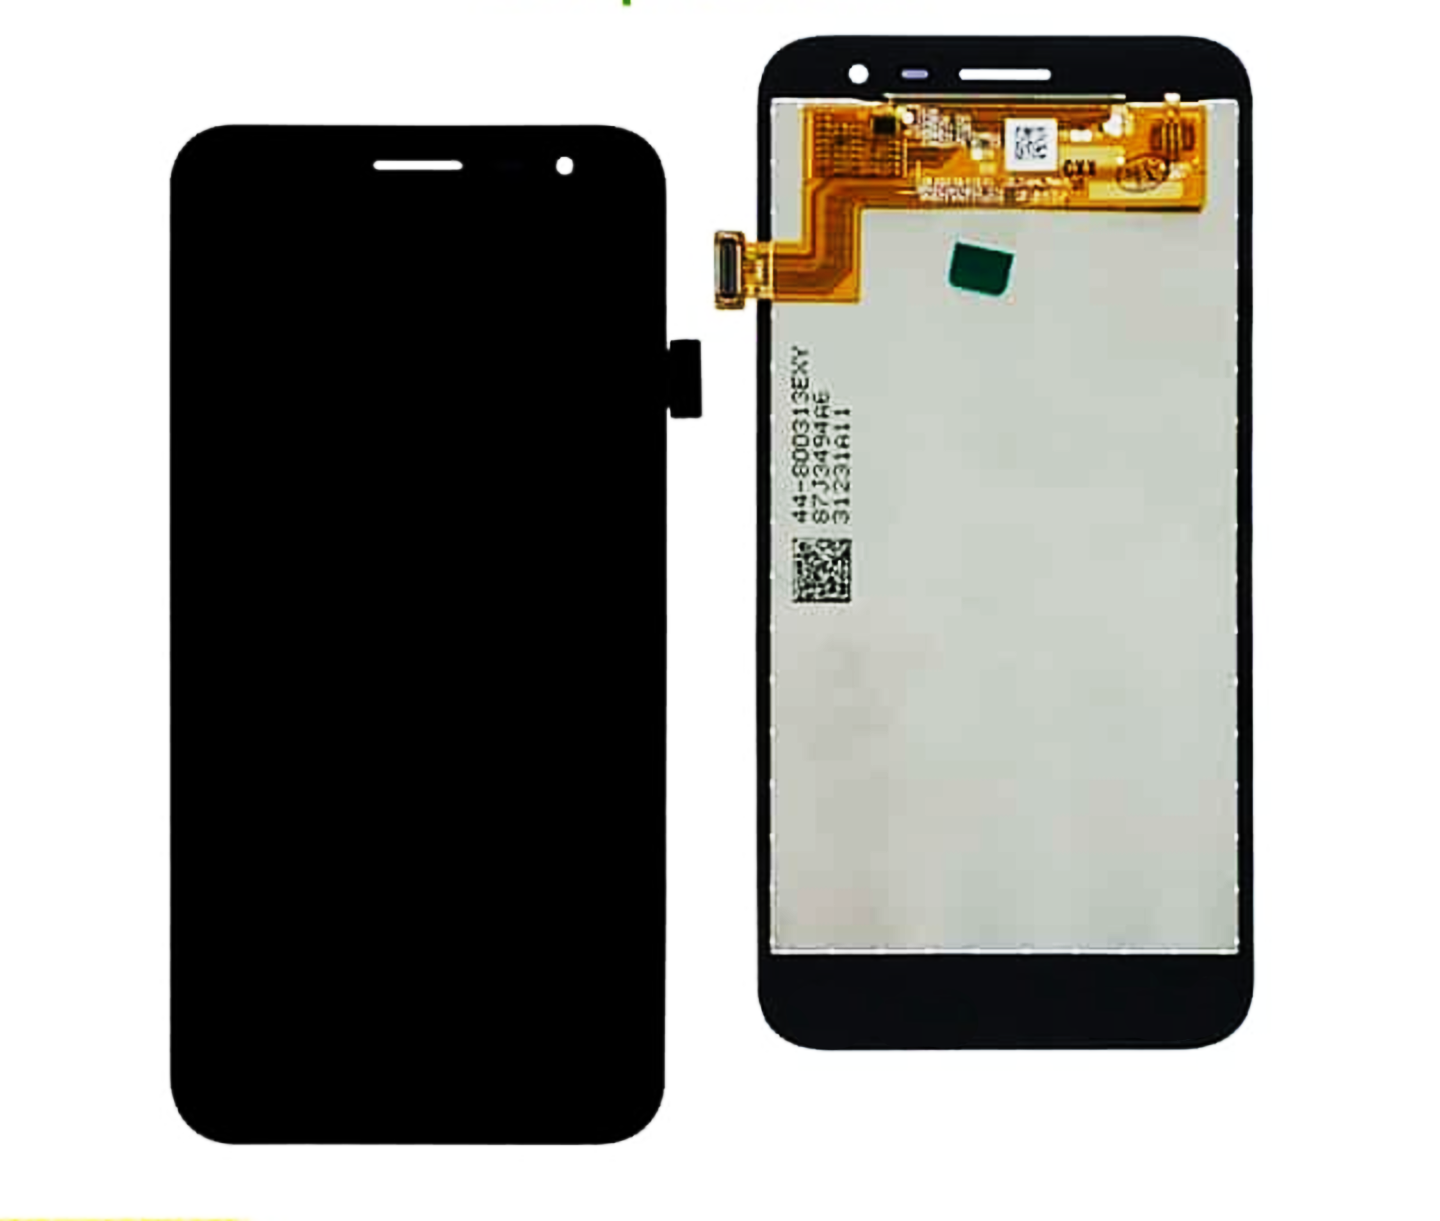 LCD Display Digitizer Touch Screen Assembly Replacement for Samsung Galaxy J2 Core - Black